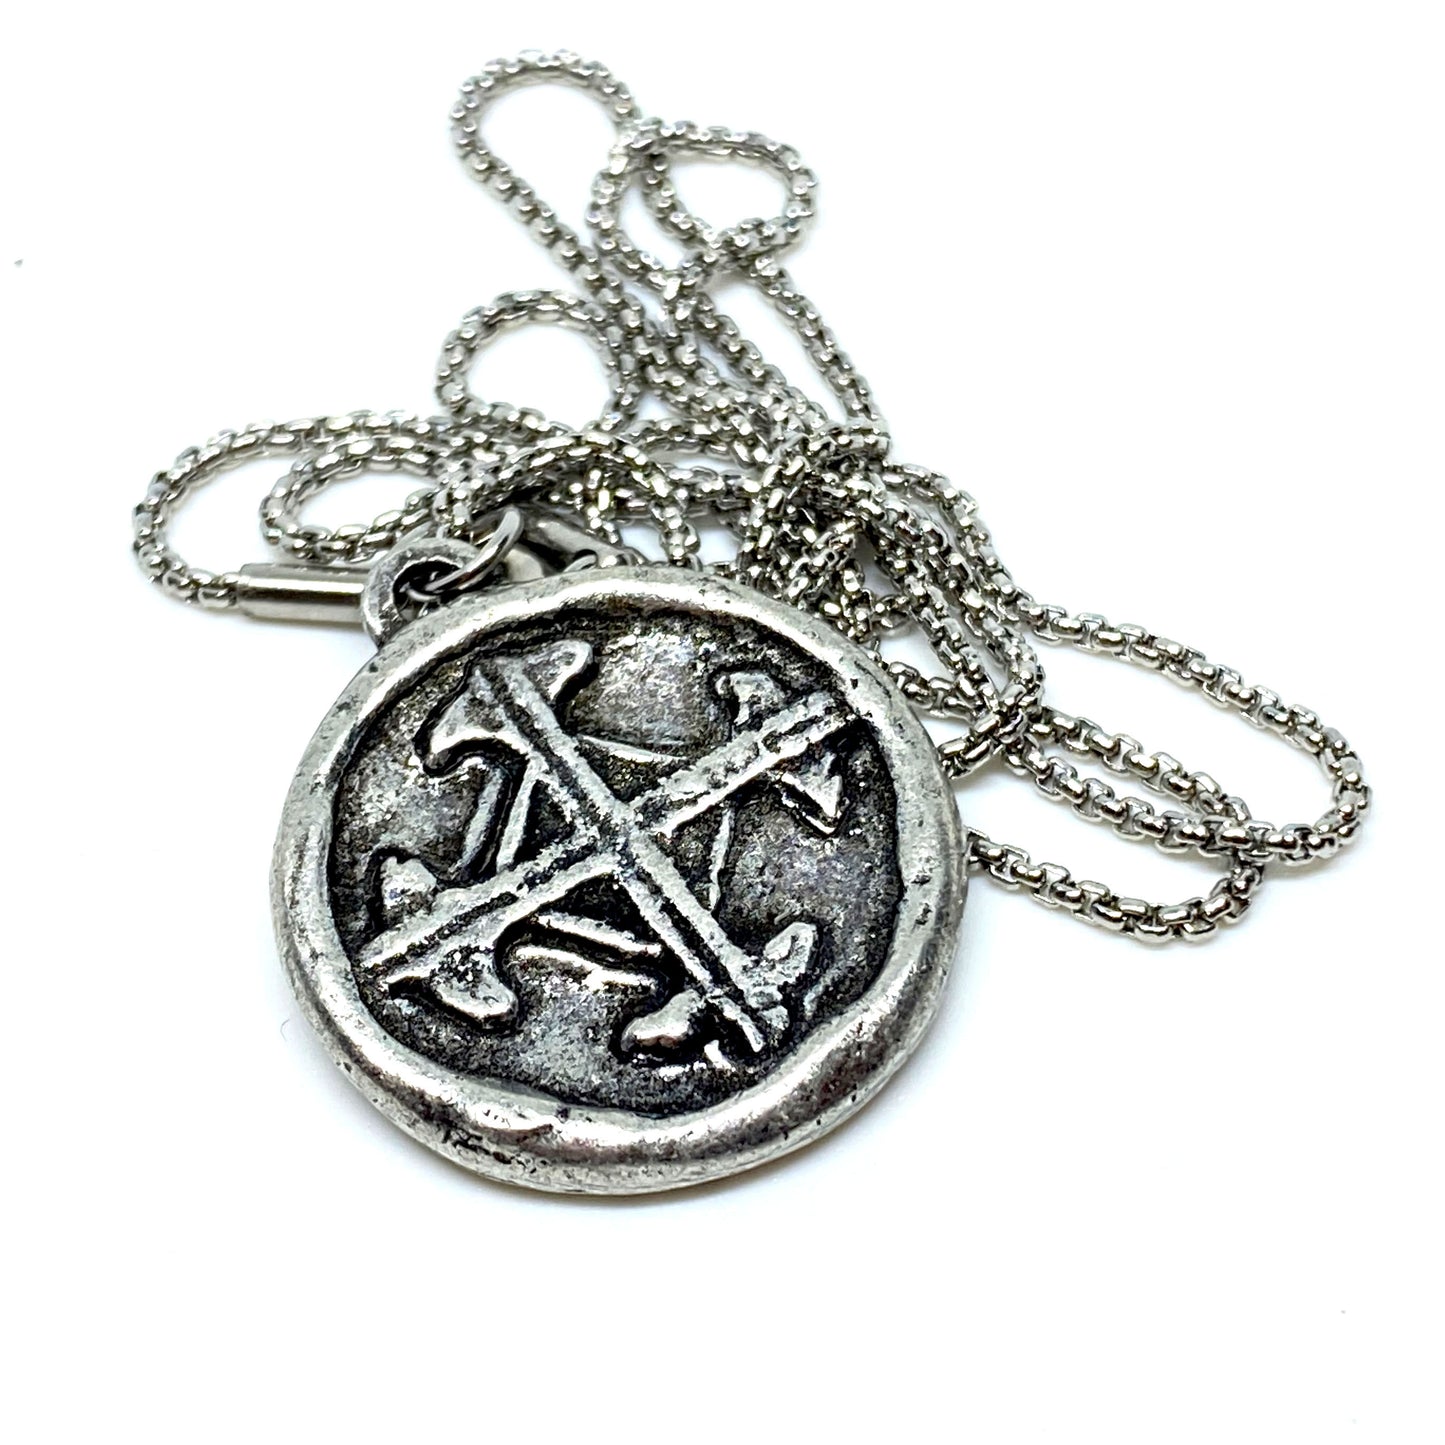 Serenity Prayer Necklace, Men's Soldered Pendant with Cross, Unisex Jewelry Gift, Faith, ST-024